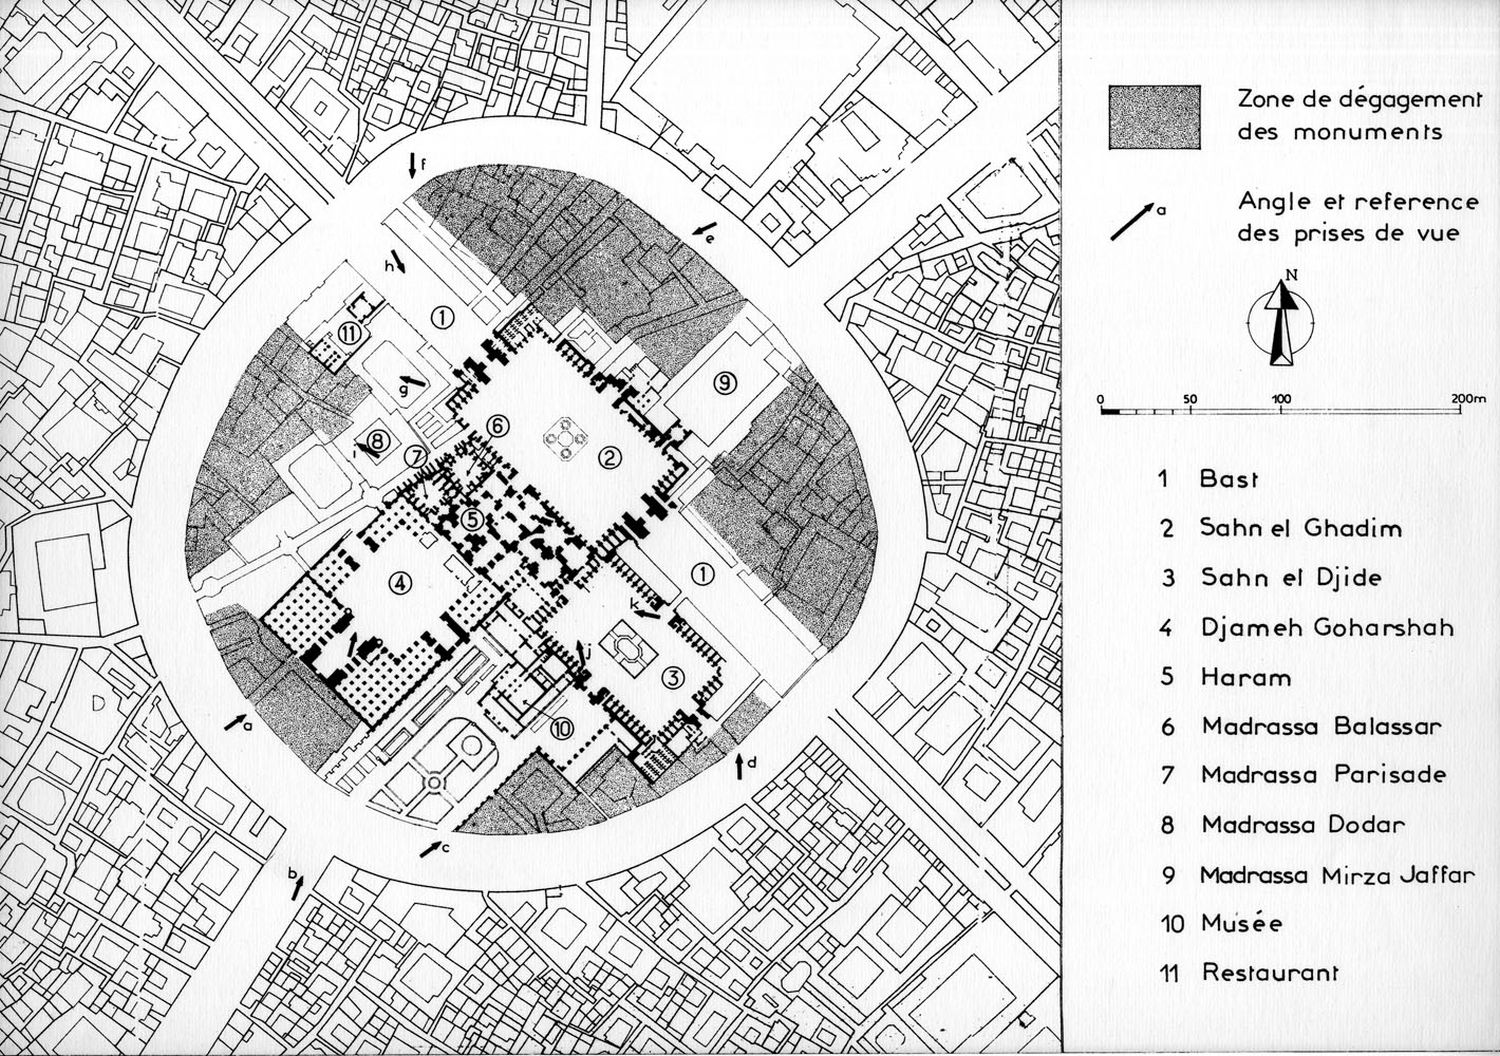 Imam Riza Shrine Complex - Mashhad town center renovation project: plan showing area around Imam Riza Complex showing buildings proposed for clearance (highlighted in gray).